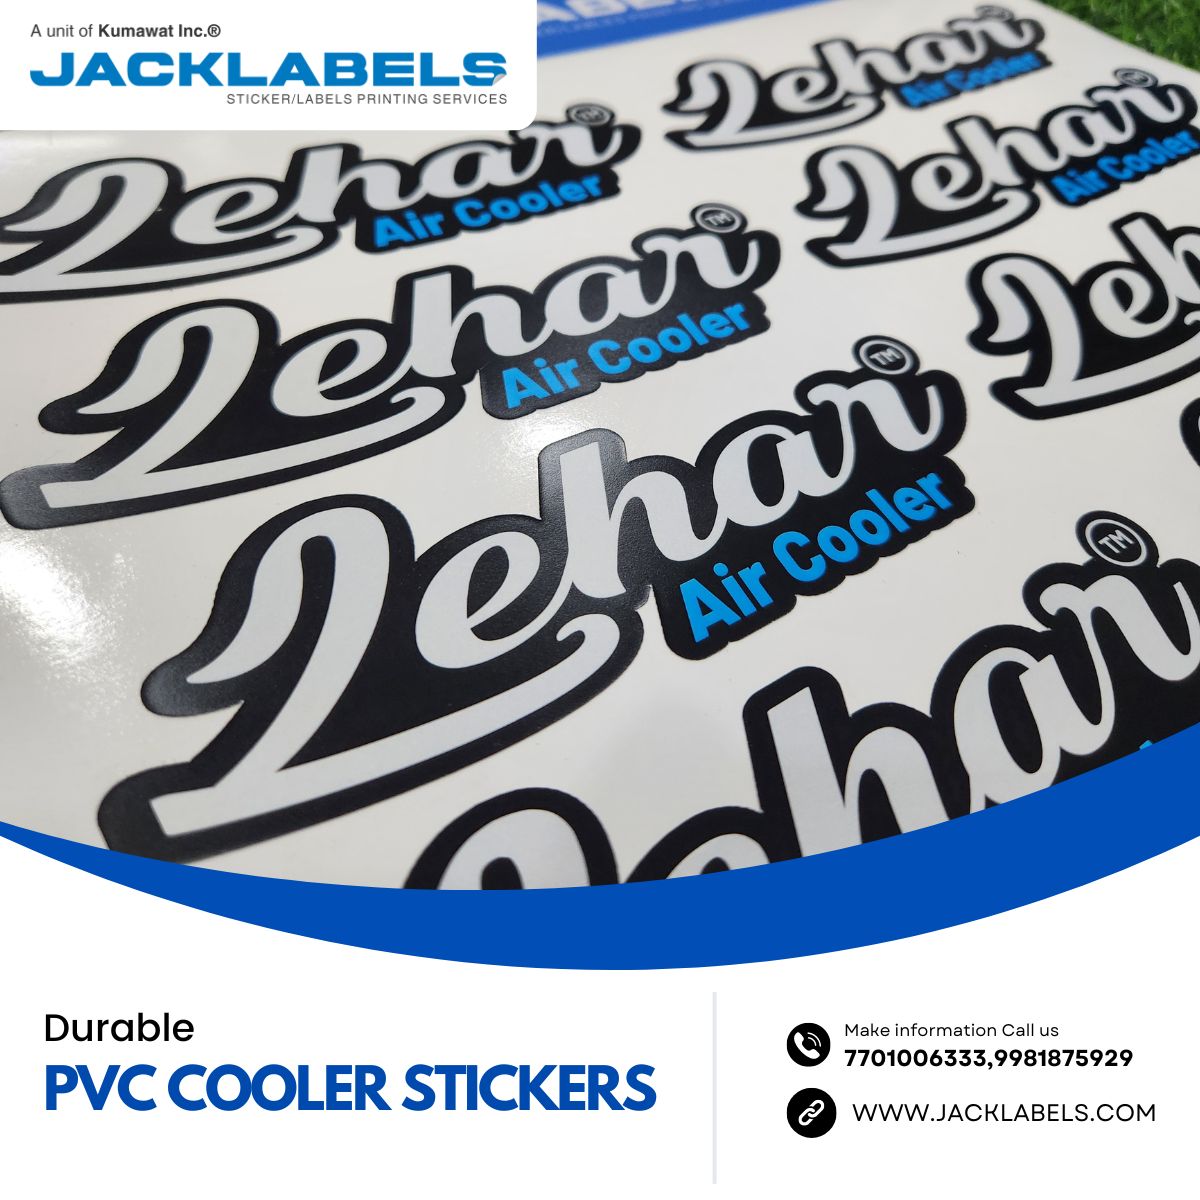 Our ultra-durable PVC Stickers survive rain, sun & more. Perfect for water bottles, laptops, or anywhere needing a tough label. Get long-lasting color & customization! #stickers #customstickers #pvc #waterproofstickers #durablelabels